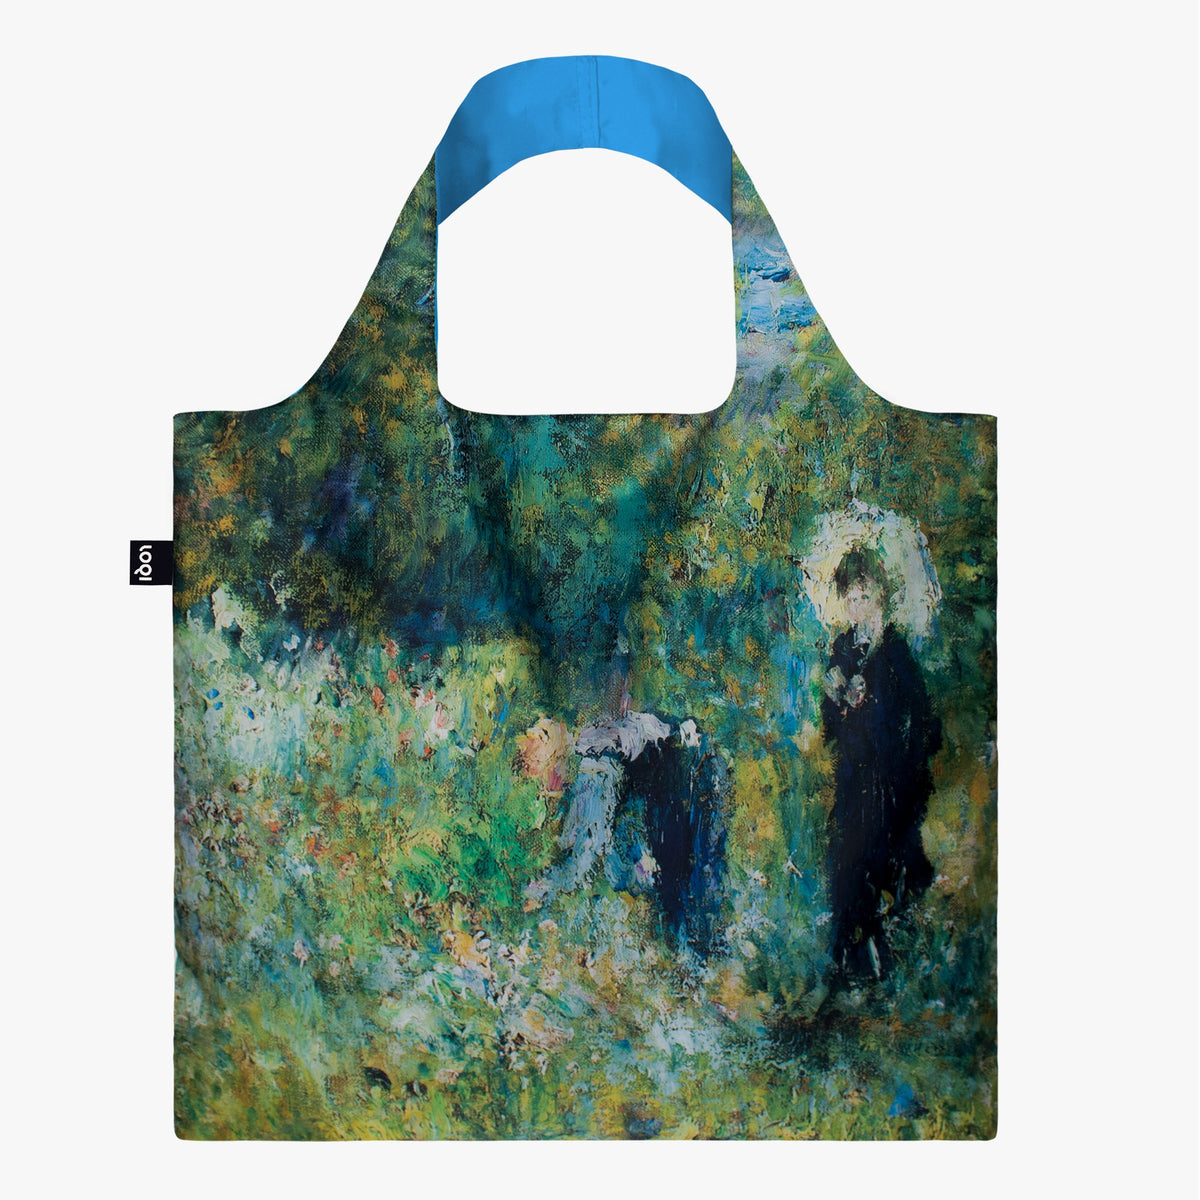 Woman with a Parasol in a Garden Recycled Bag